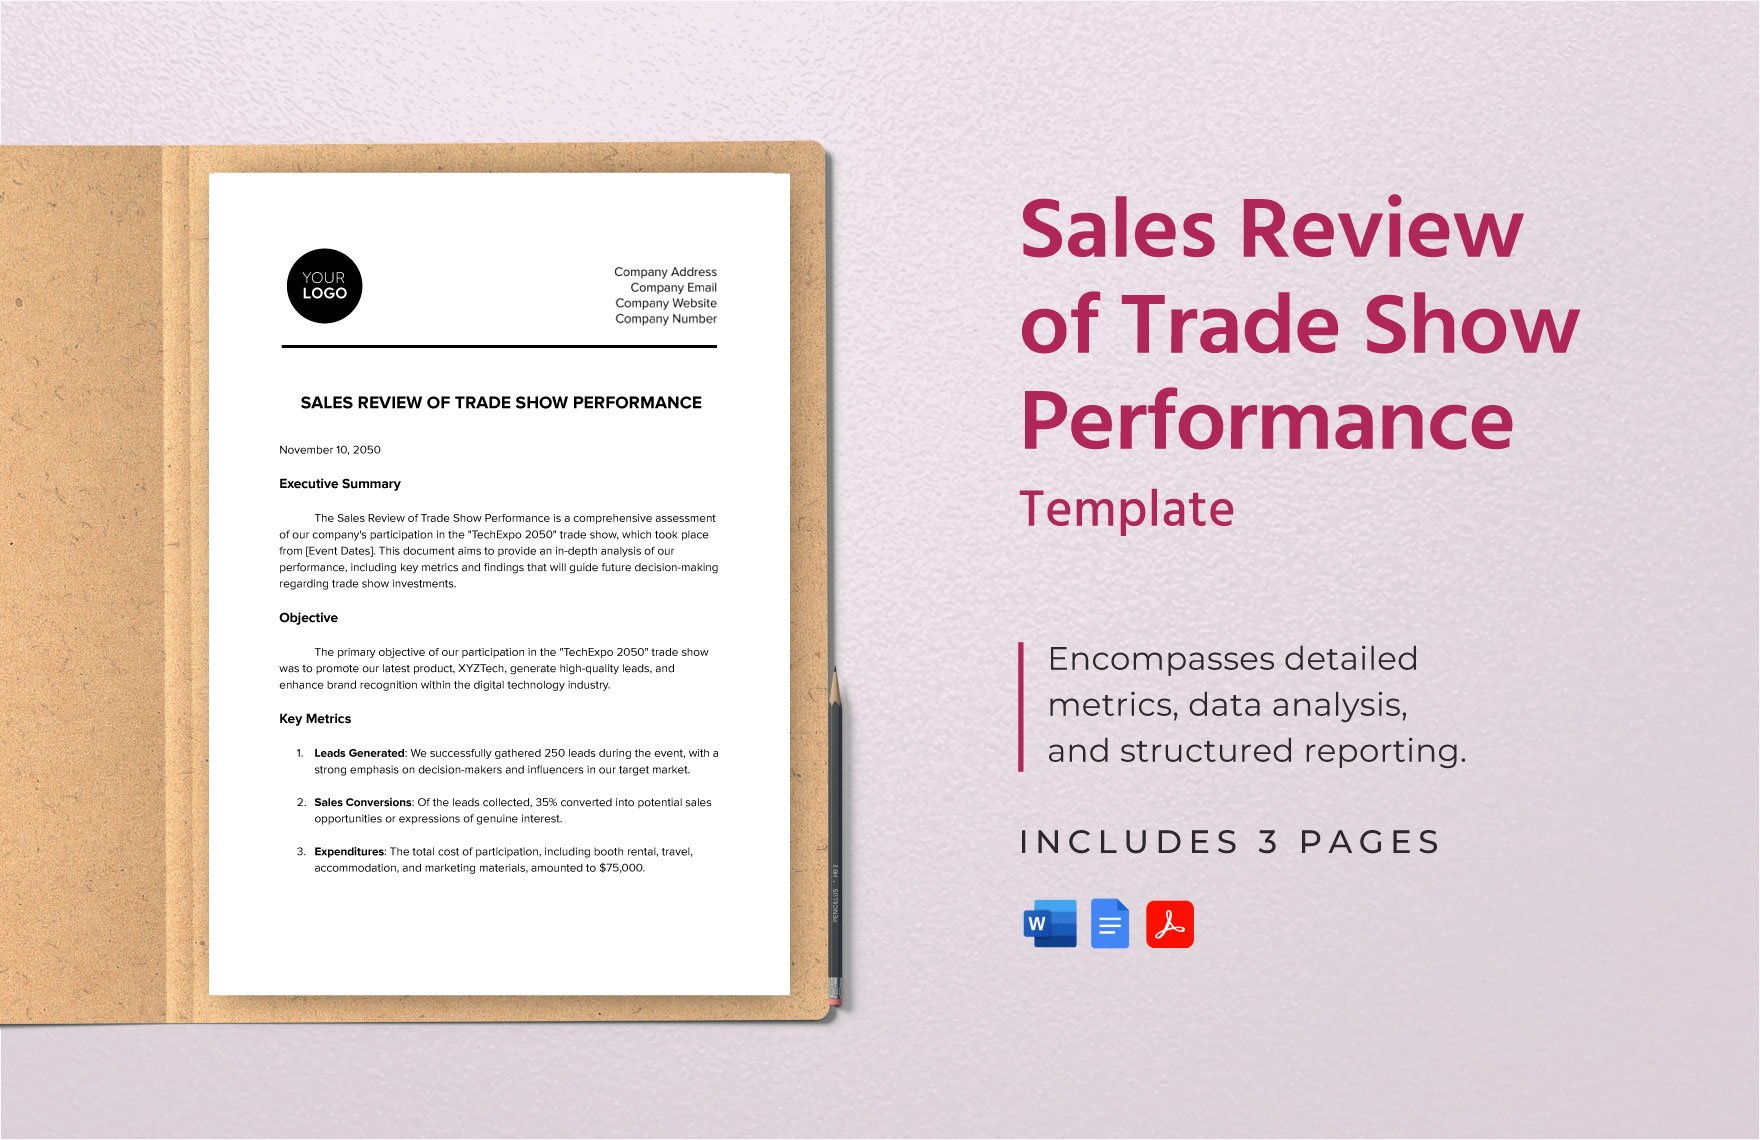 Sales Review of Trade Show Performance Template